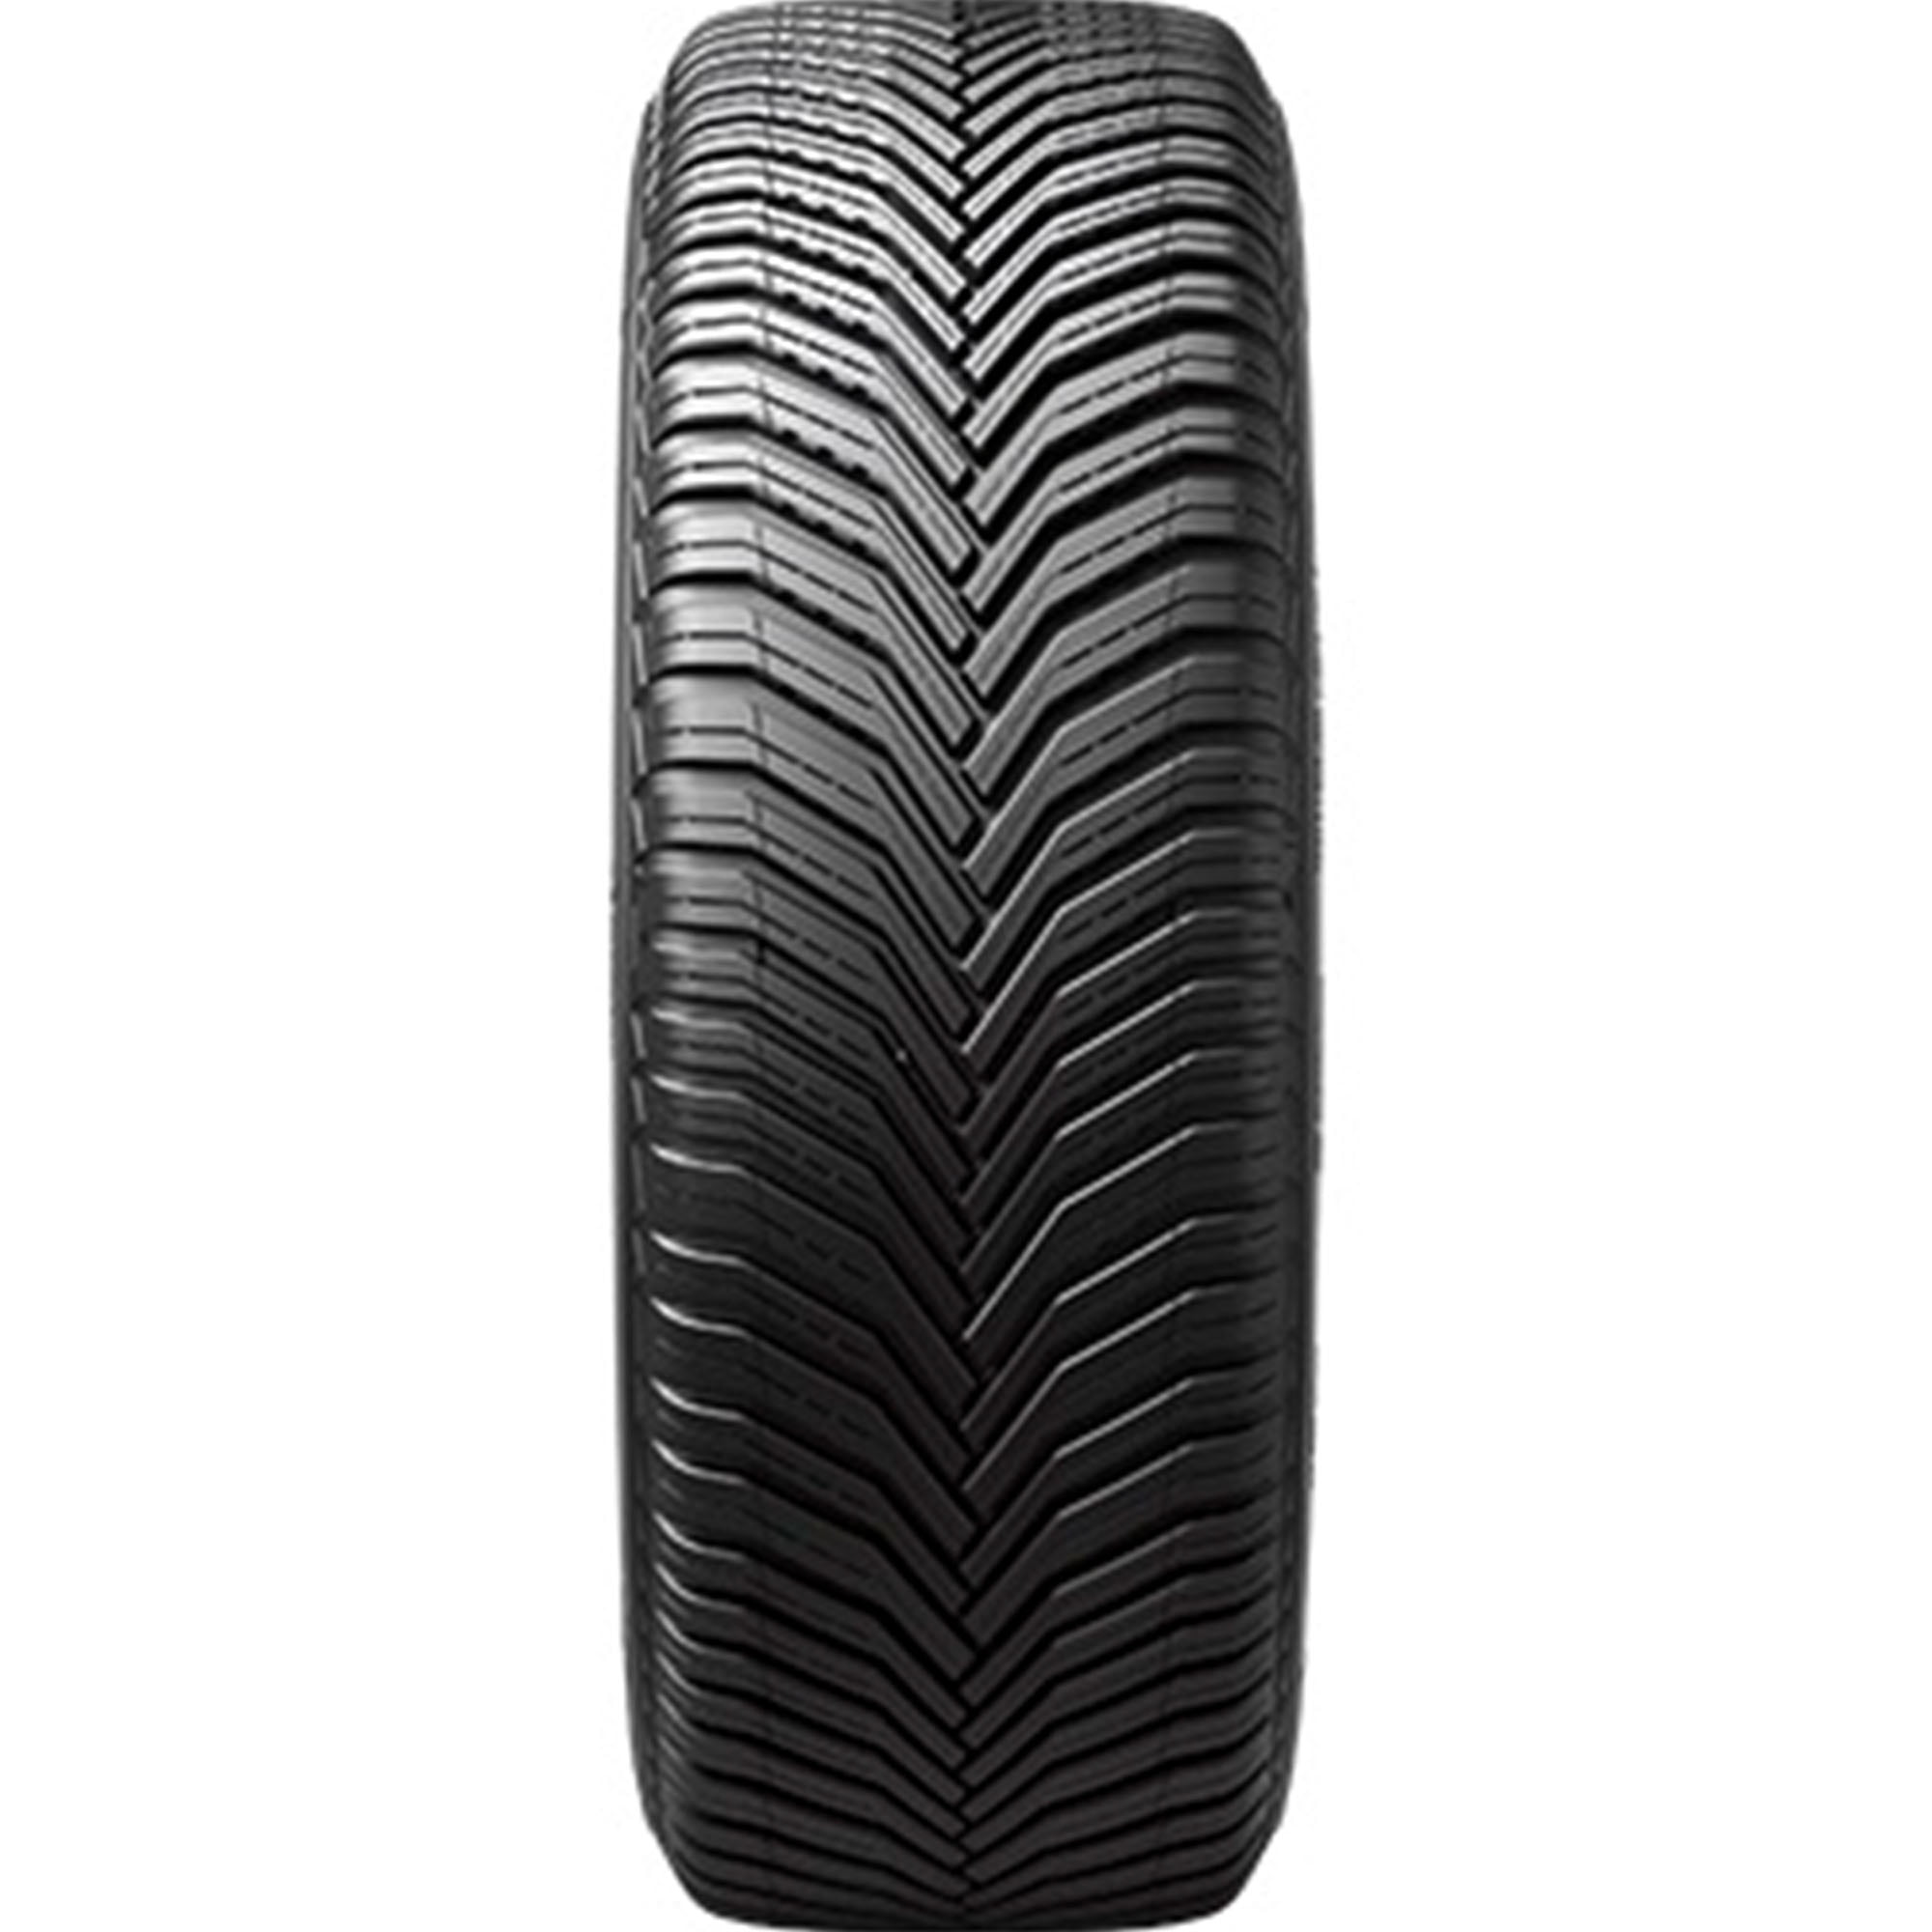 Michelin Tire Cross All XL SUV/Crossover Climate2 Weather A/W 235/55R19 105V